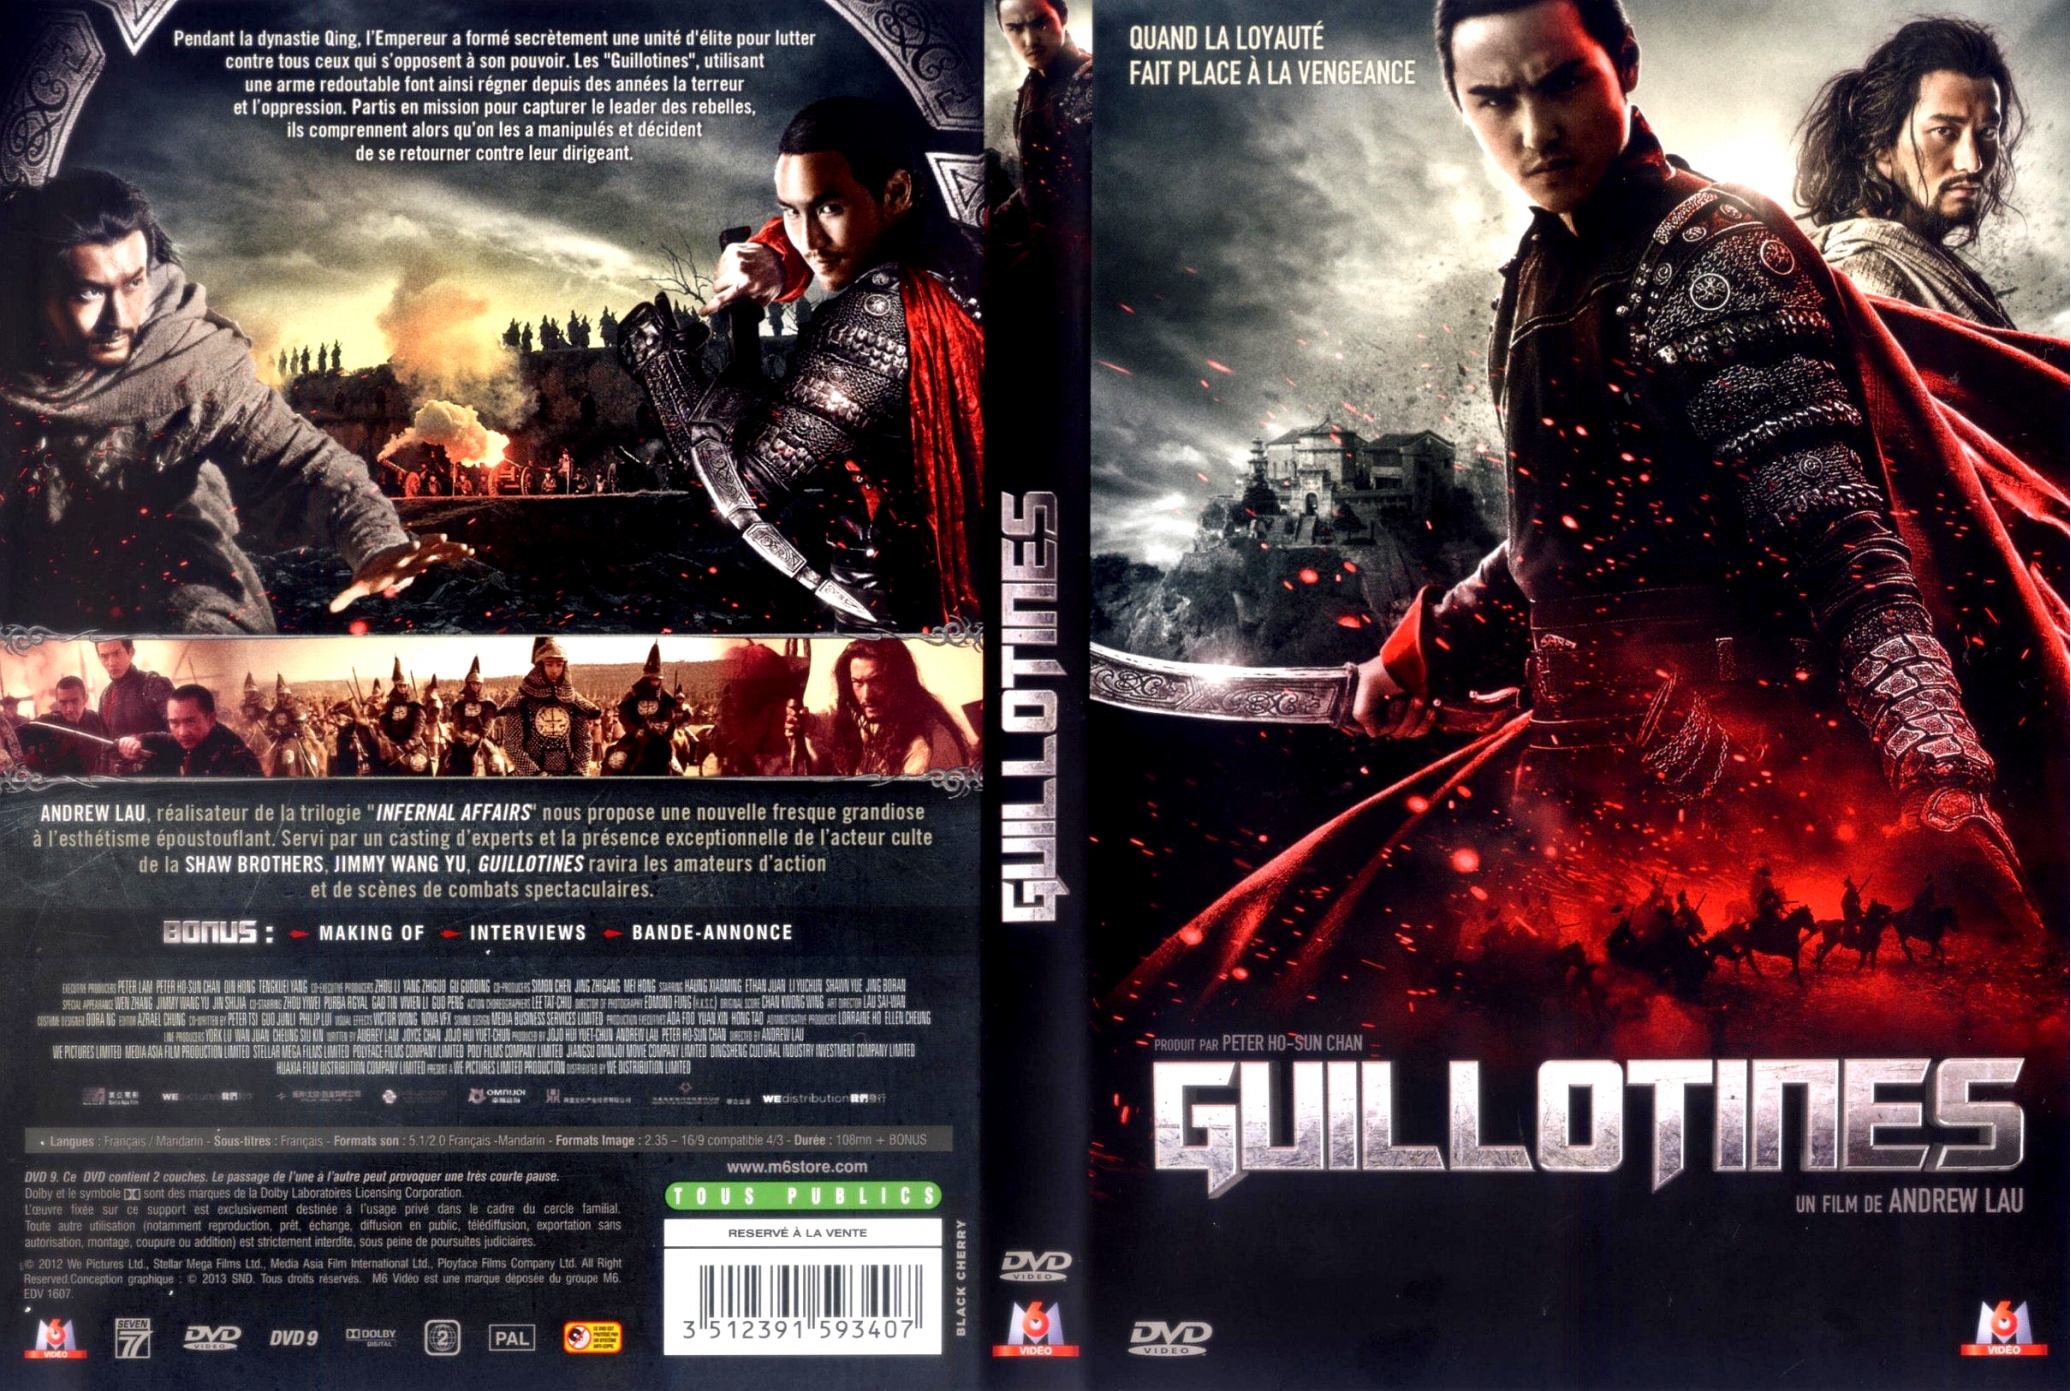 Jaquette DVD Guillotines